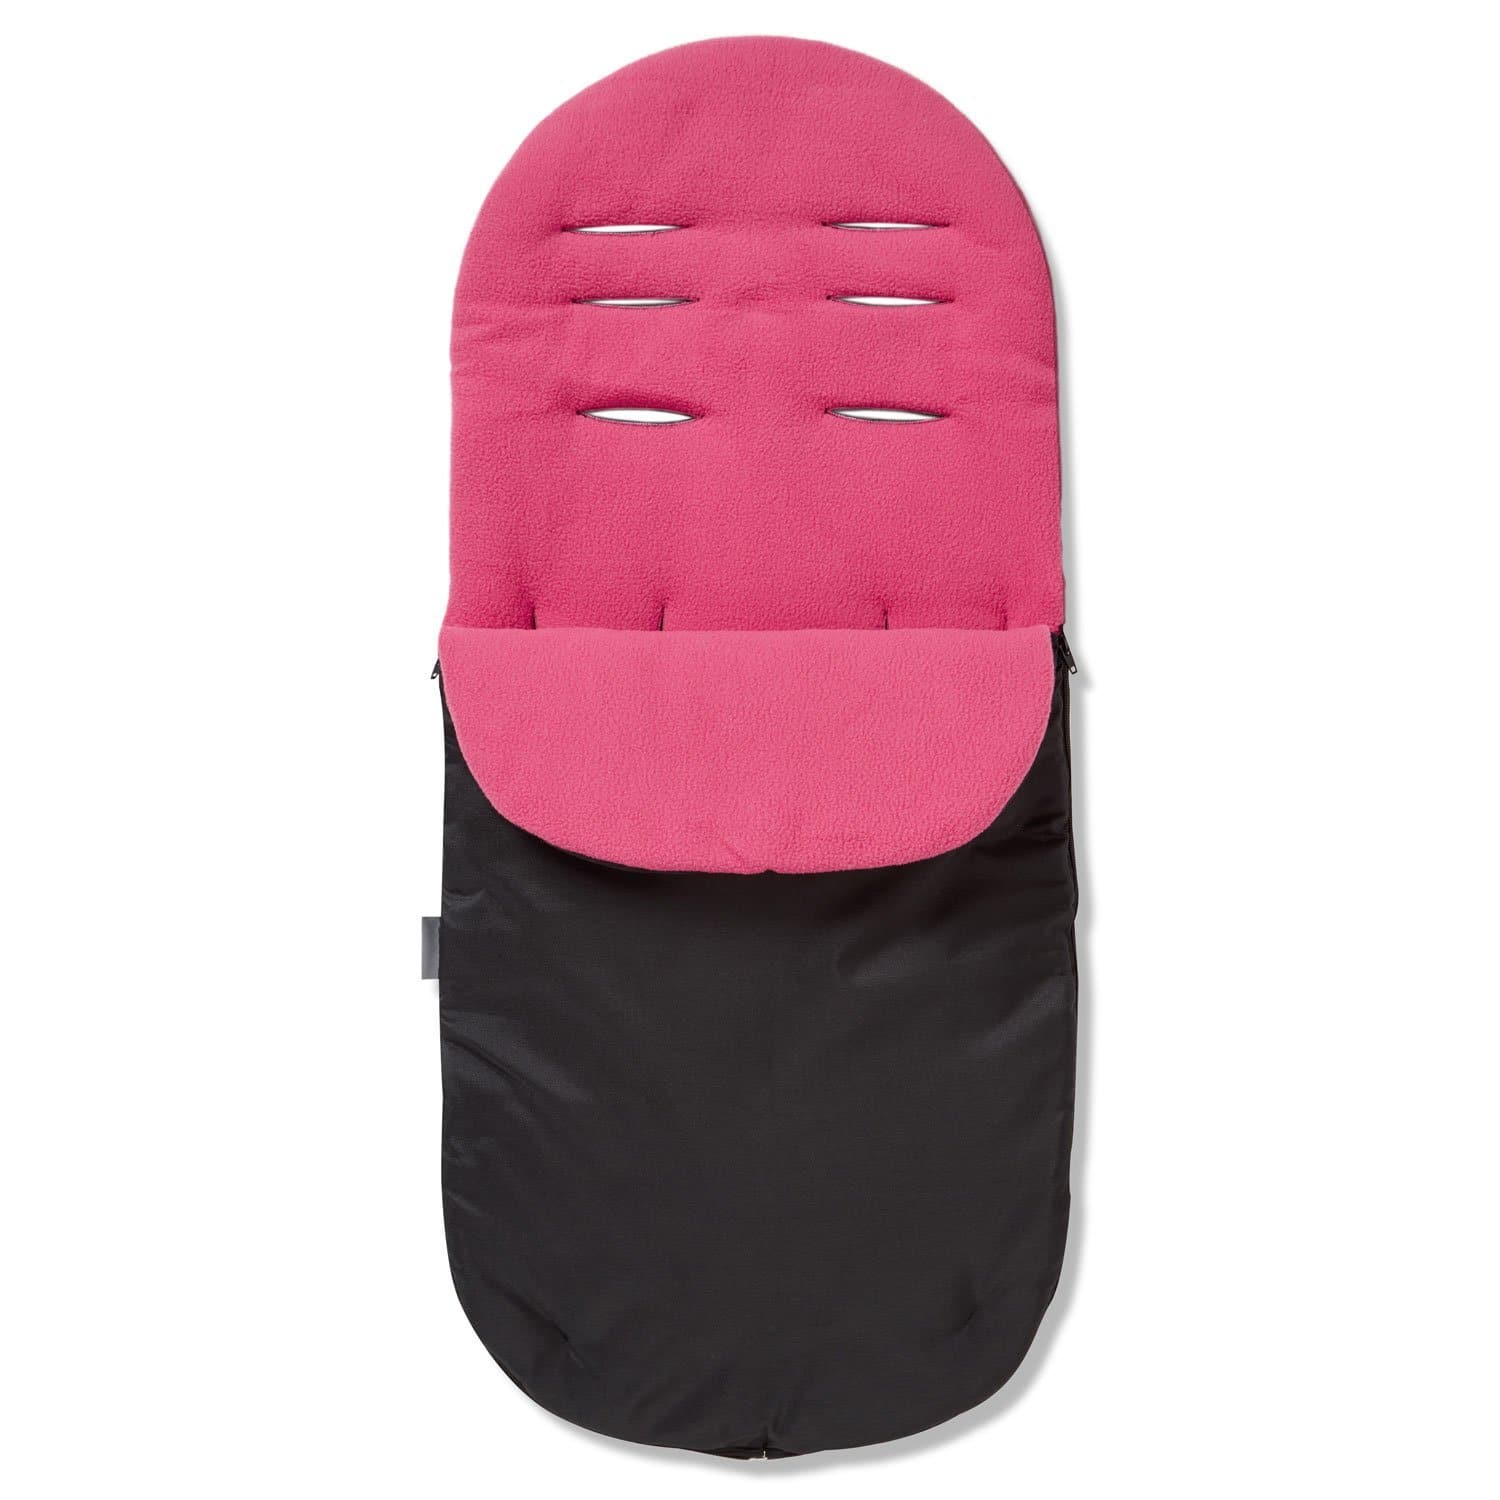 Footmuff / Cosy Toes Compatible with Easywalker - Dark Pink / Fits All Models | For Your Little One